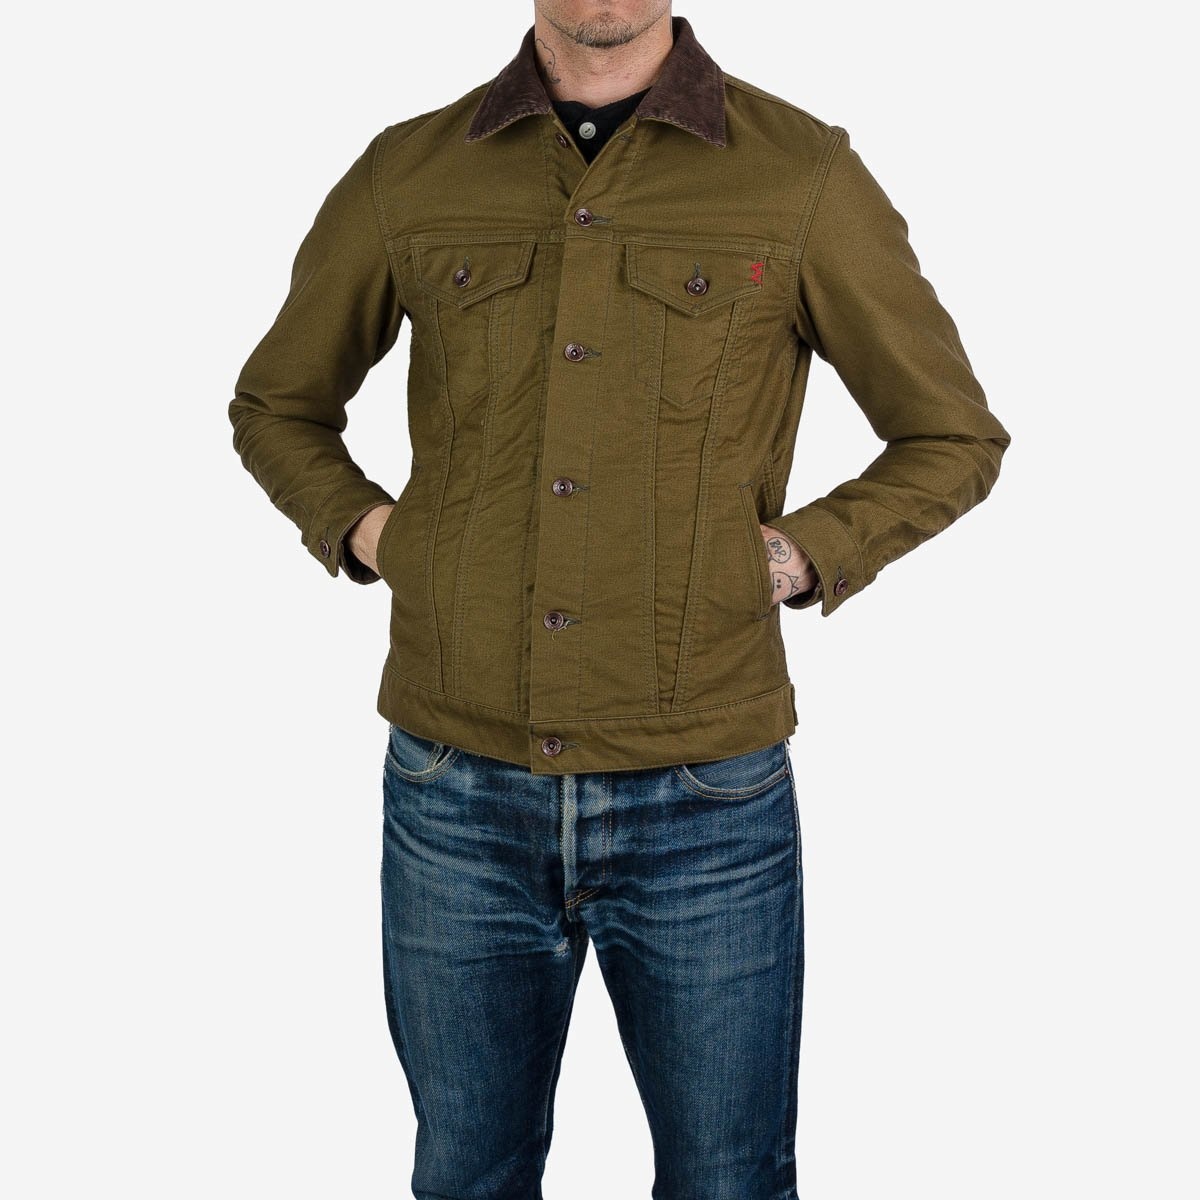 IH-526-ODG 12oz Whipcord Modified Type III Jacket - Olive Drab Green - 4